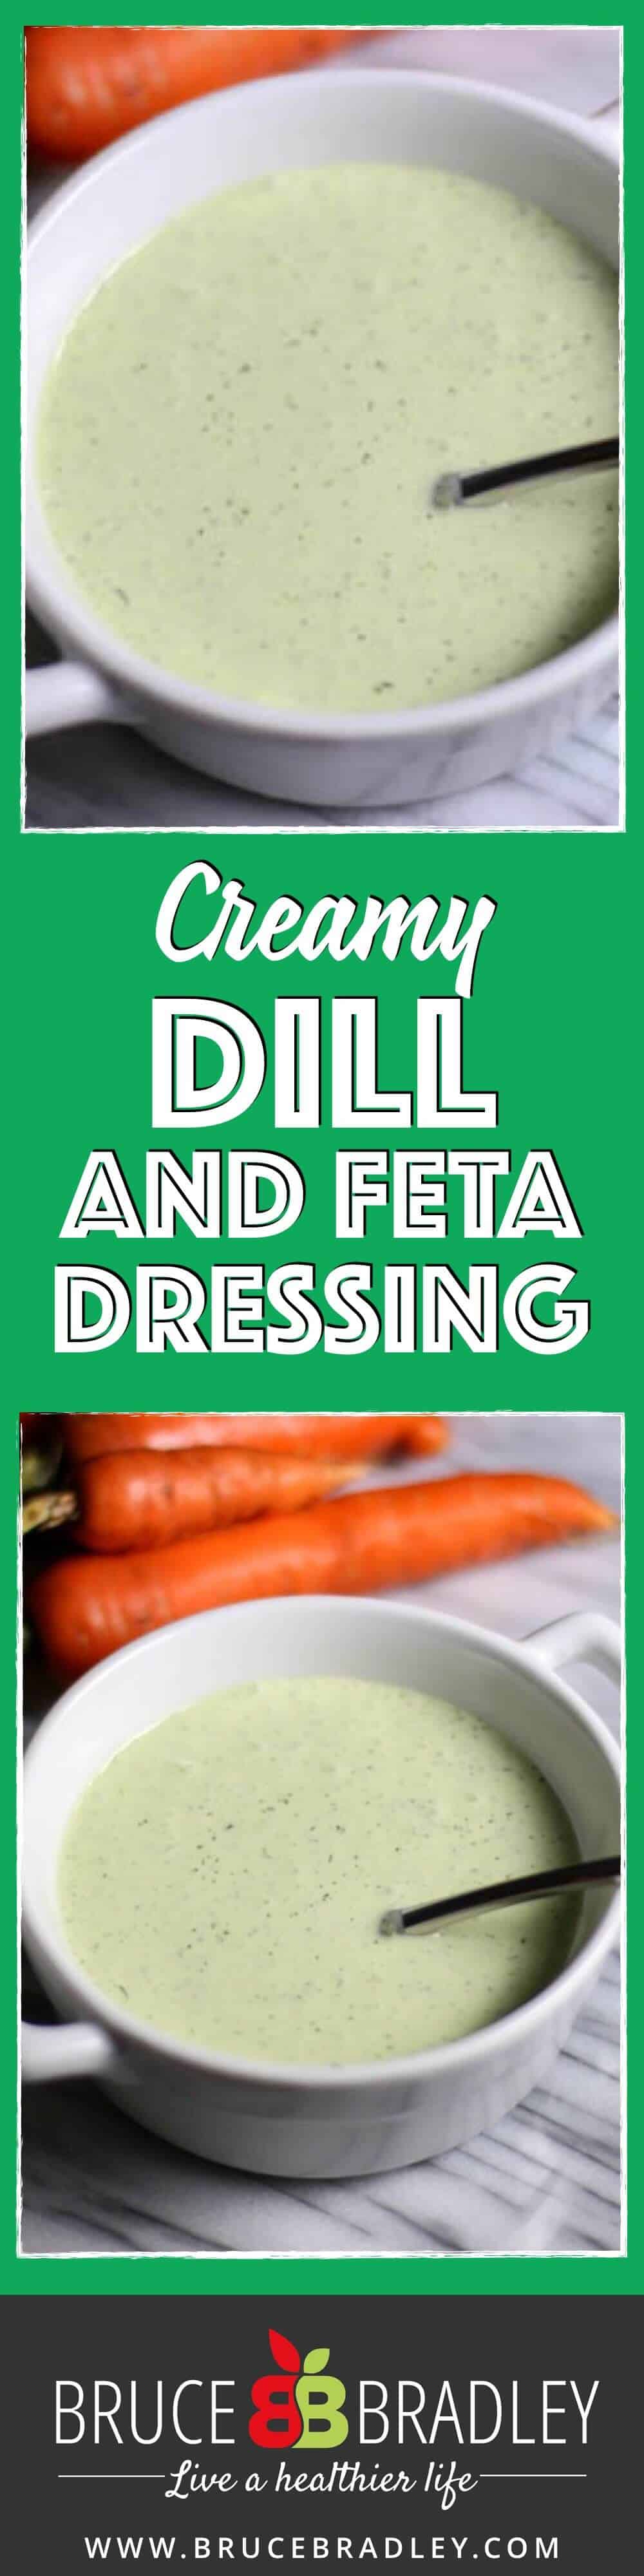 When You'Re Looking To Dress Up A Salad, Fish, Or Veggies, Try This Delicious Creamy Dill Dressing. It'S Simply Amazing And Comes Together In 5 Minutes Or Less!